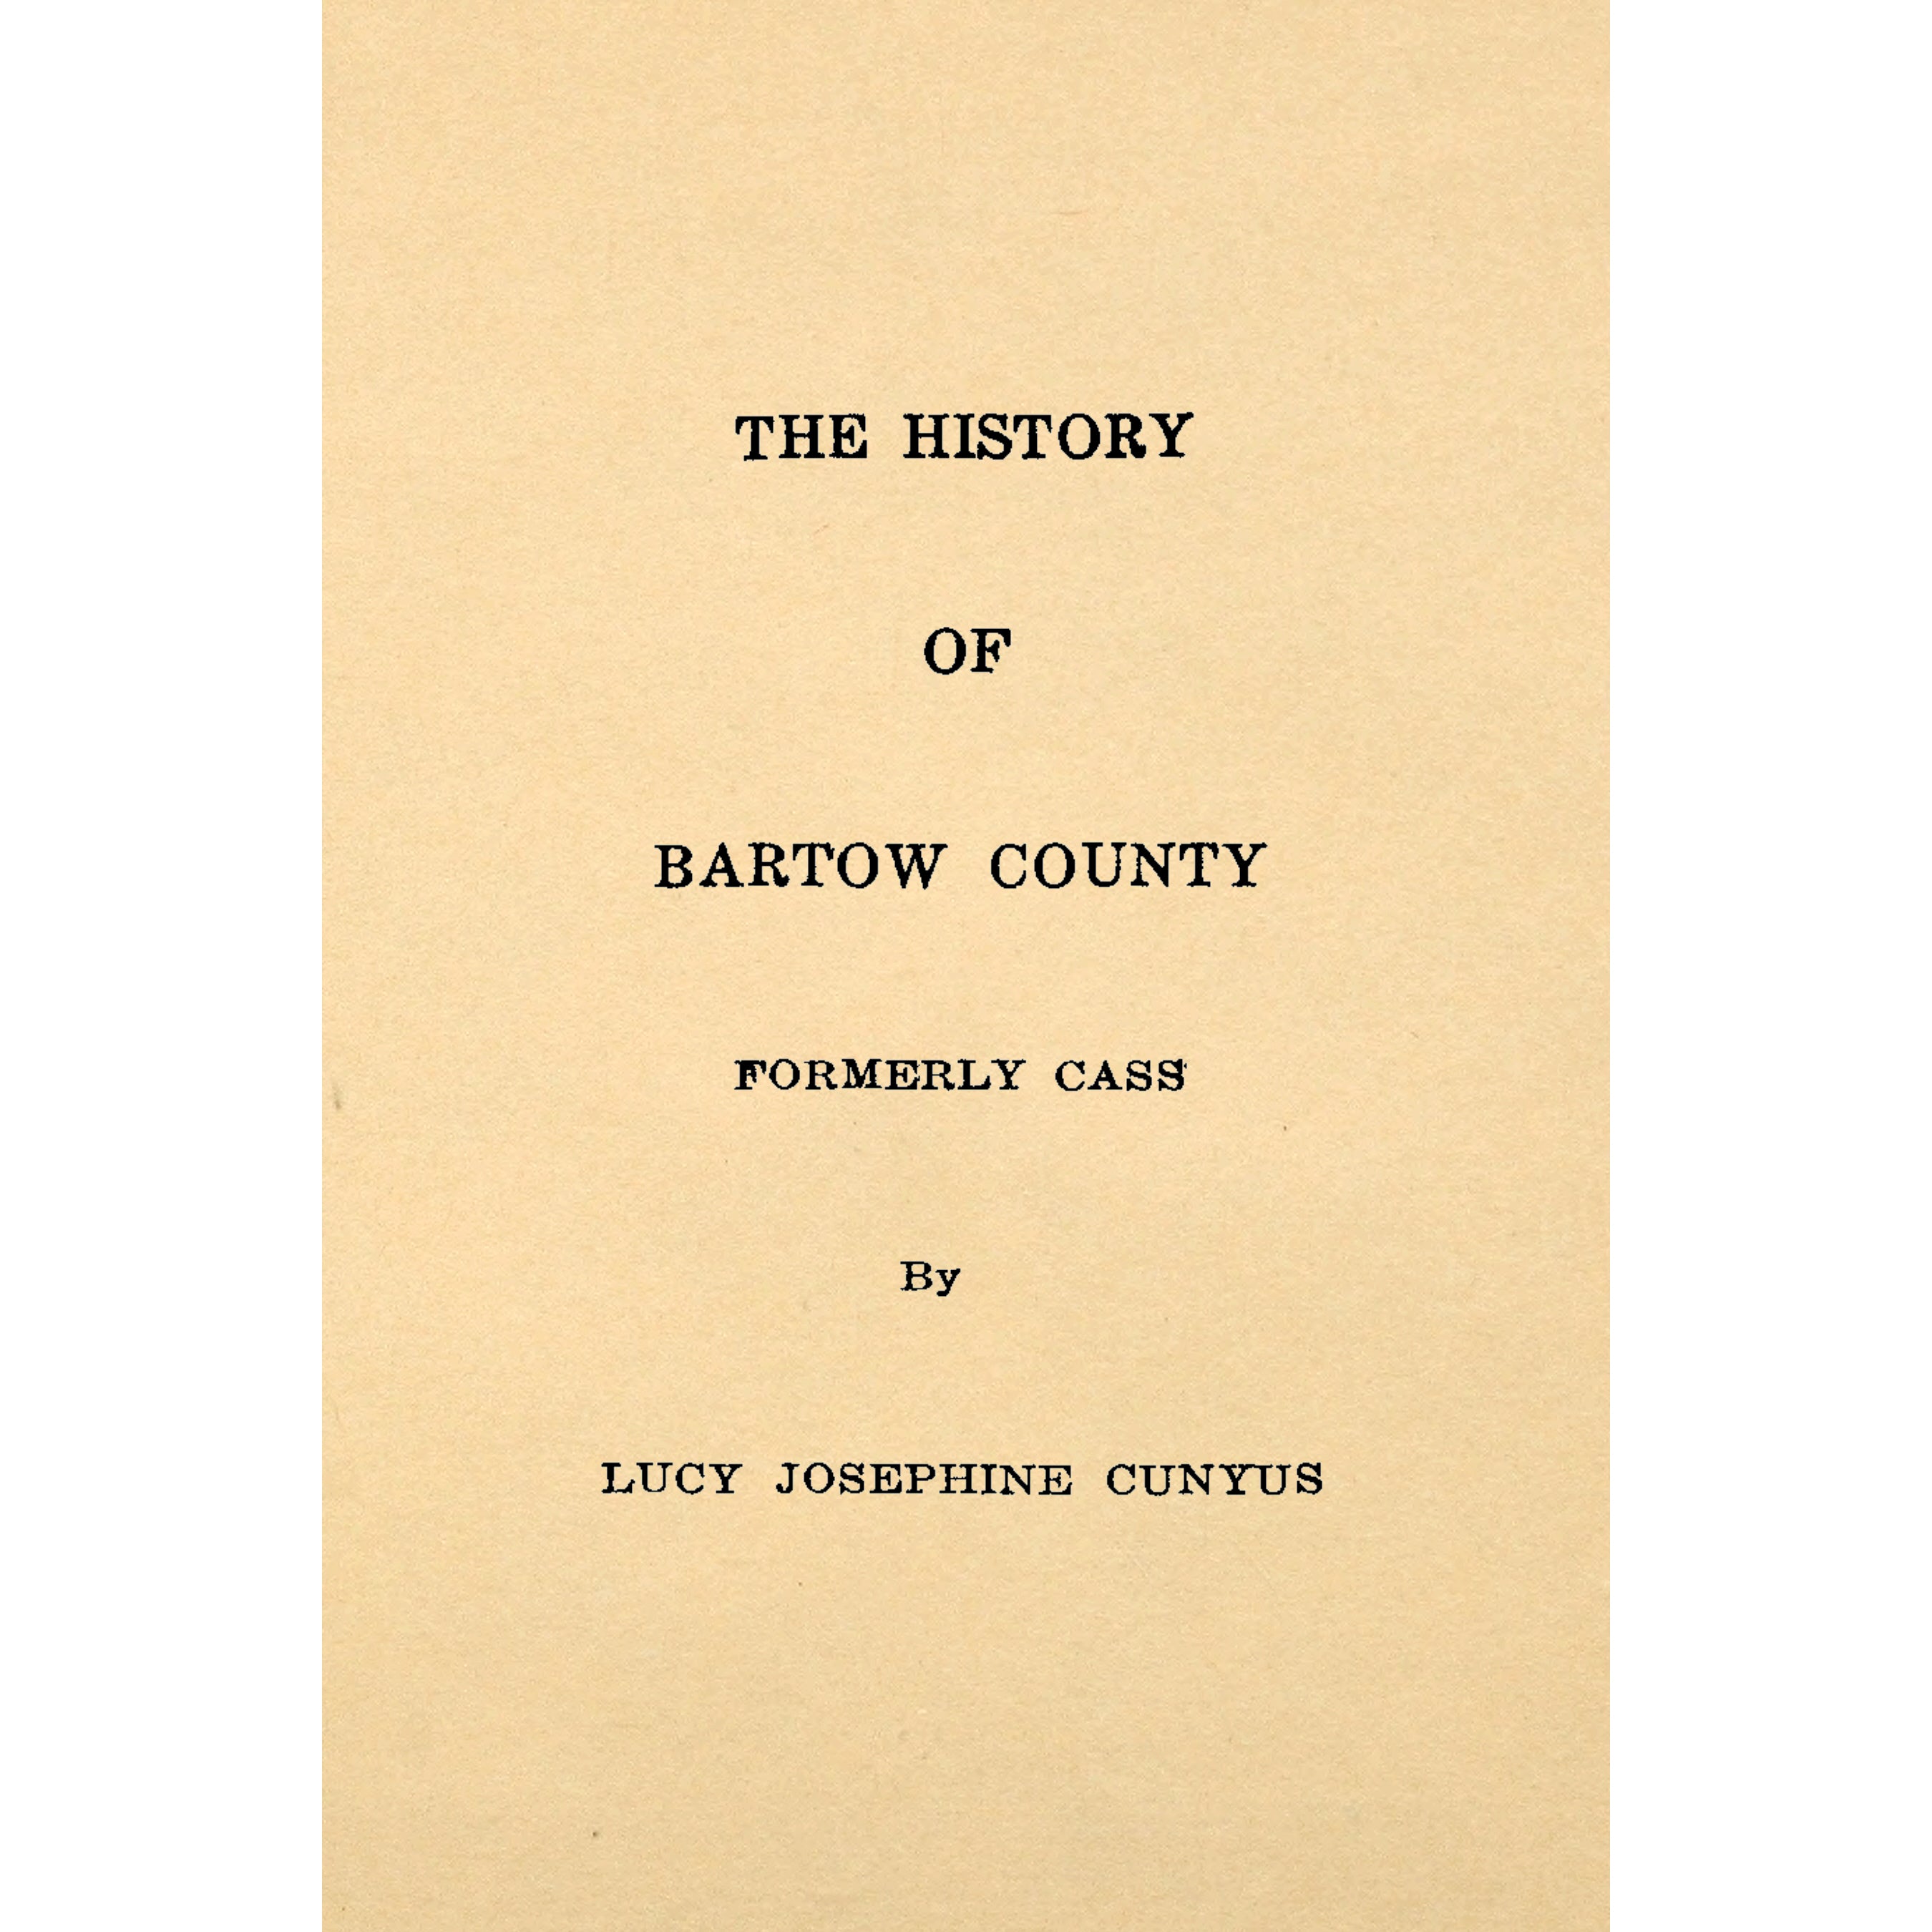 The History of Bartow County [Georgia] Formerly Cass